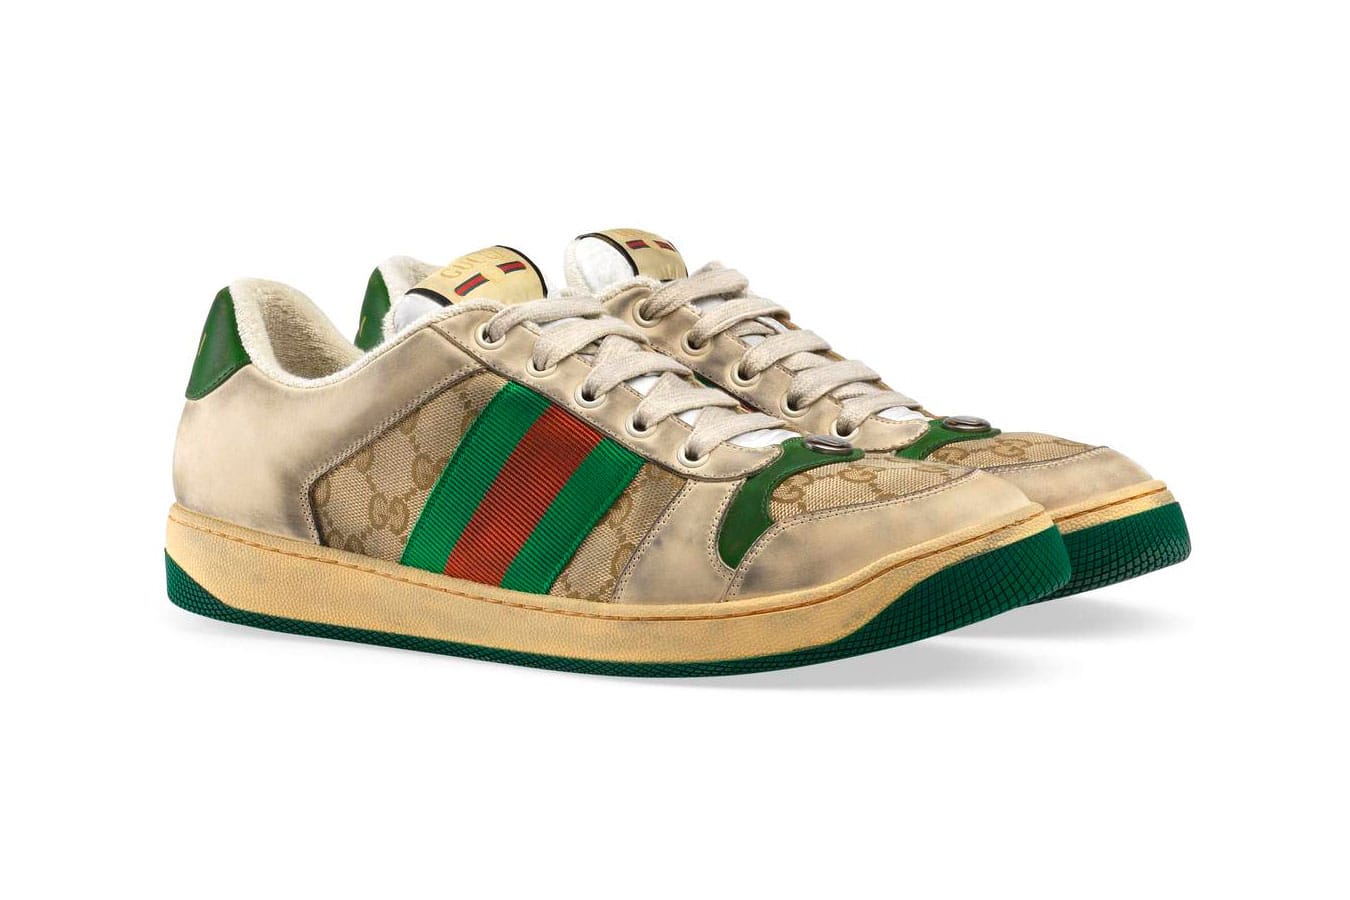 Gucci Just Launched Dirty Sneakers That Cost More Than The Rent Of A 3 BHK  In Mumbai